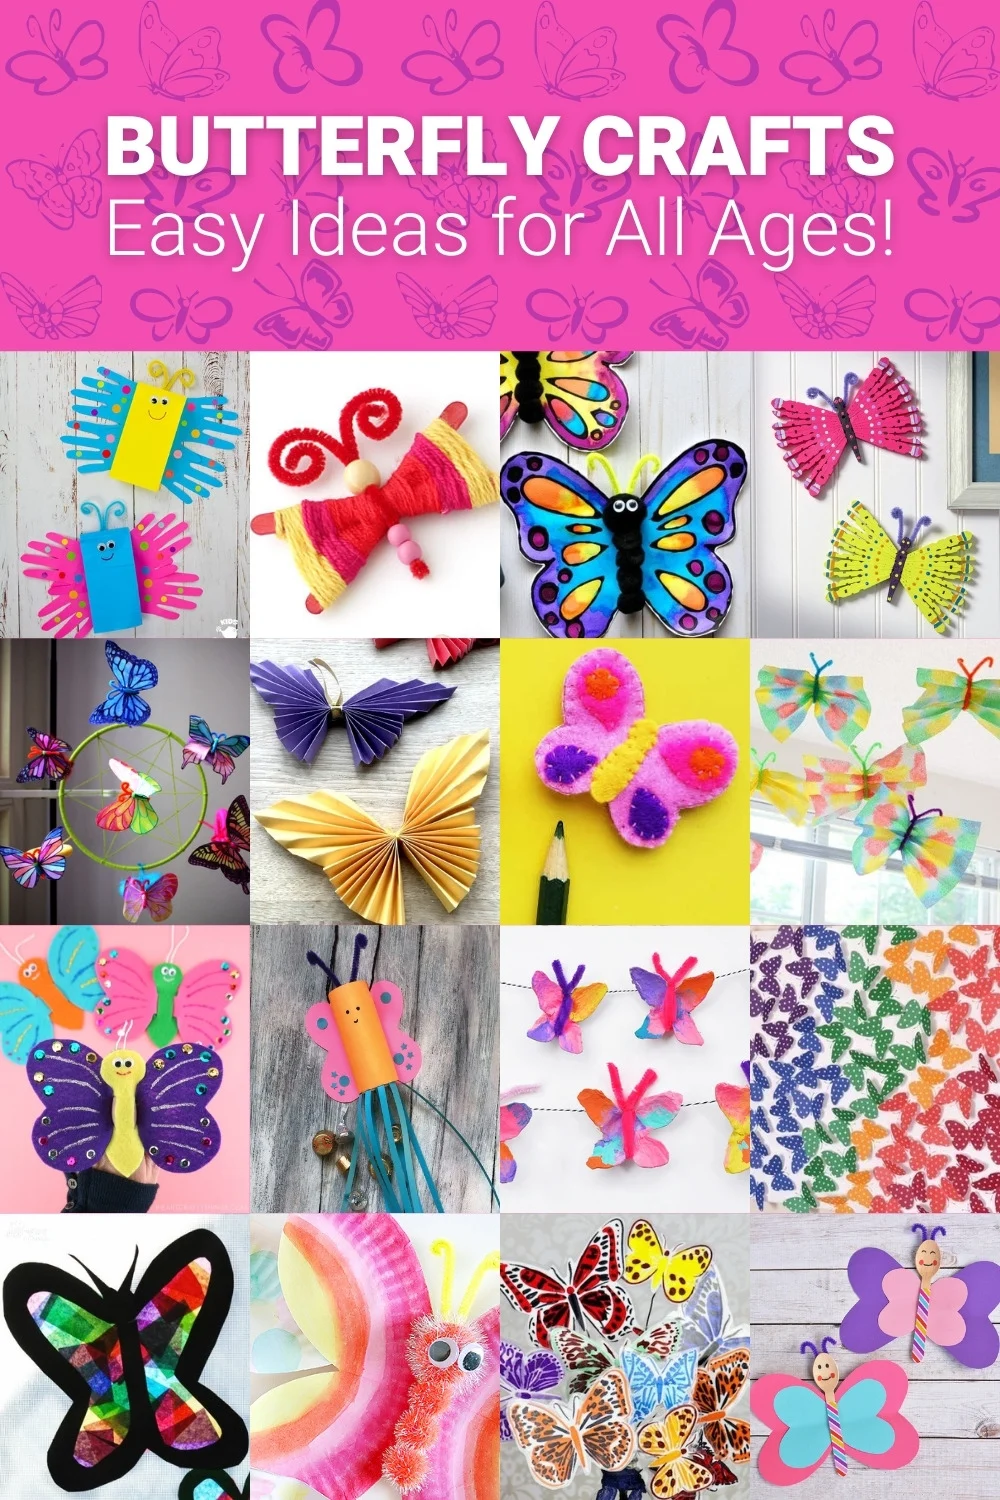 https://diycandy.b-cdn.net/wp-content/uploads/2022/06/Easy-butterfly-crafts-for-kids-of-all-ages.jpg.webp